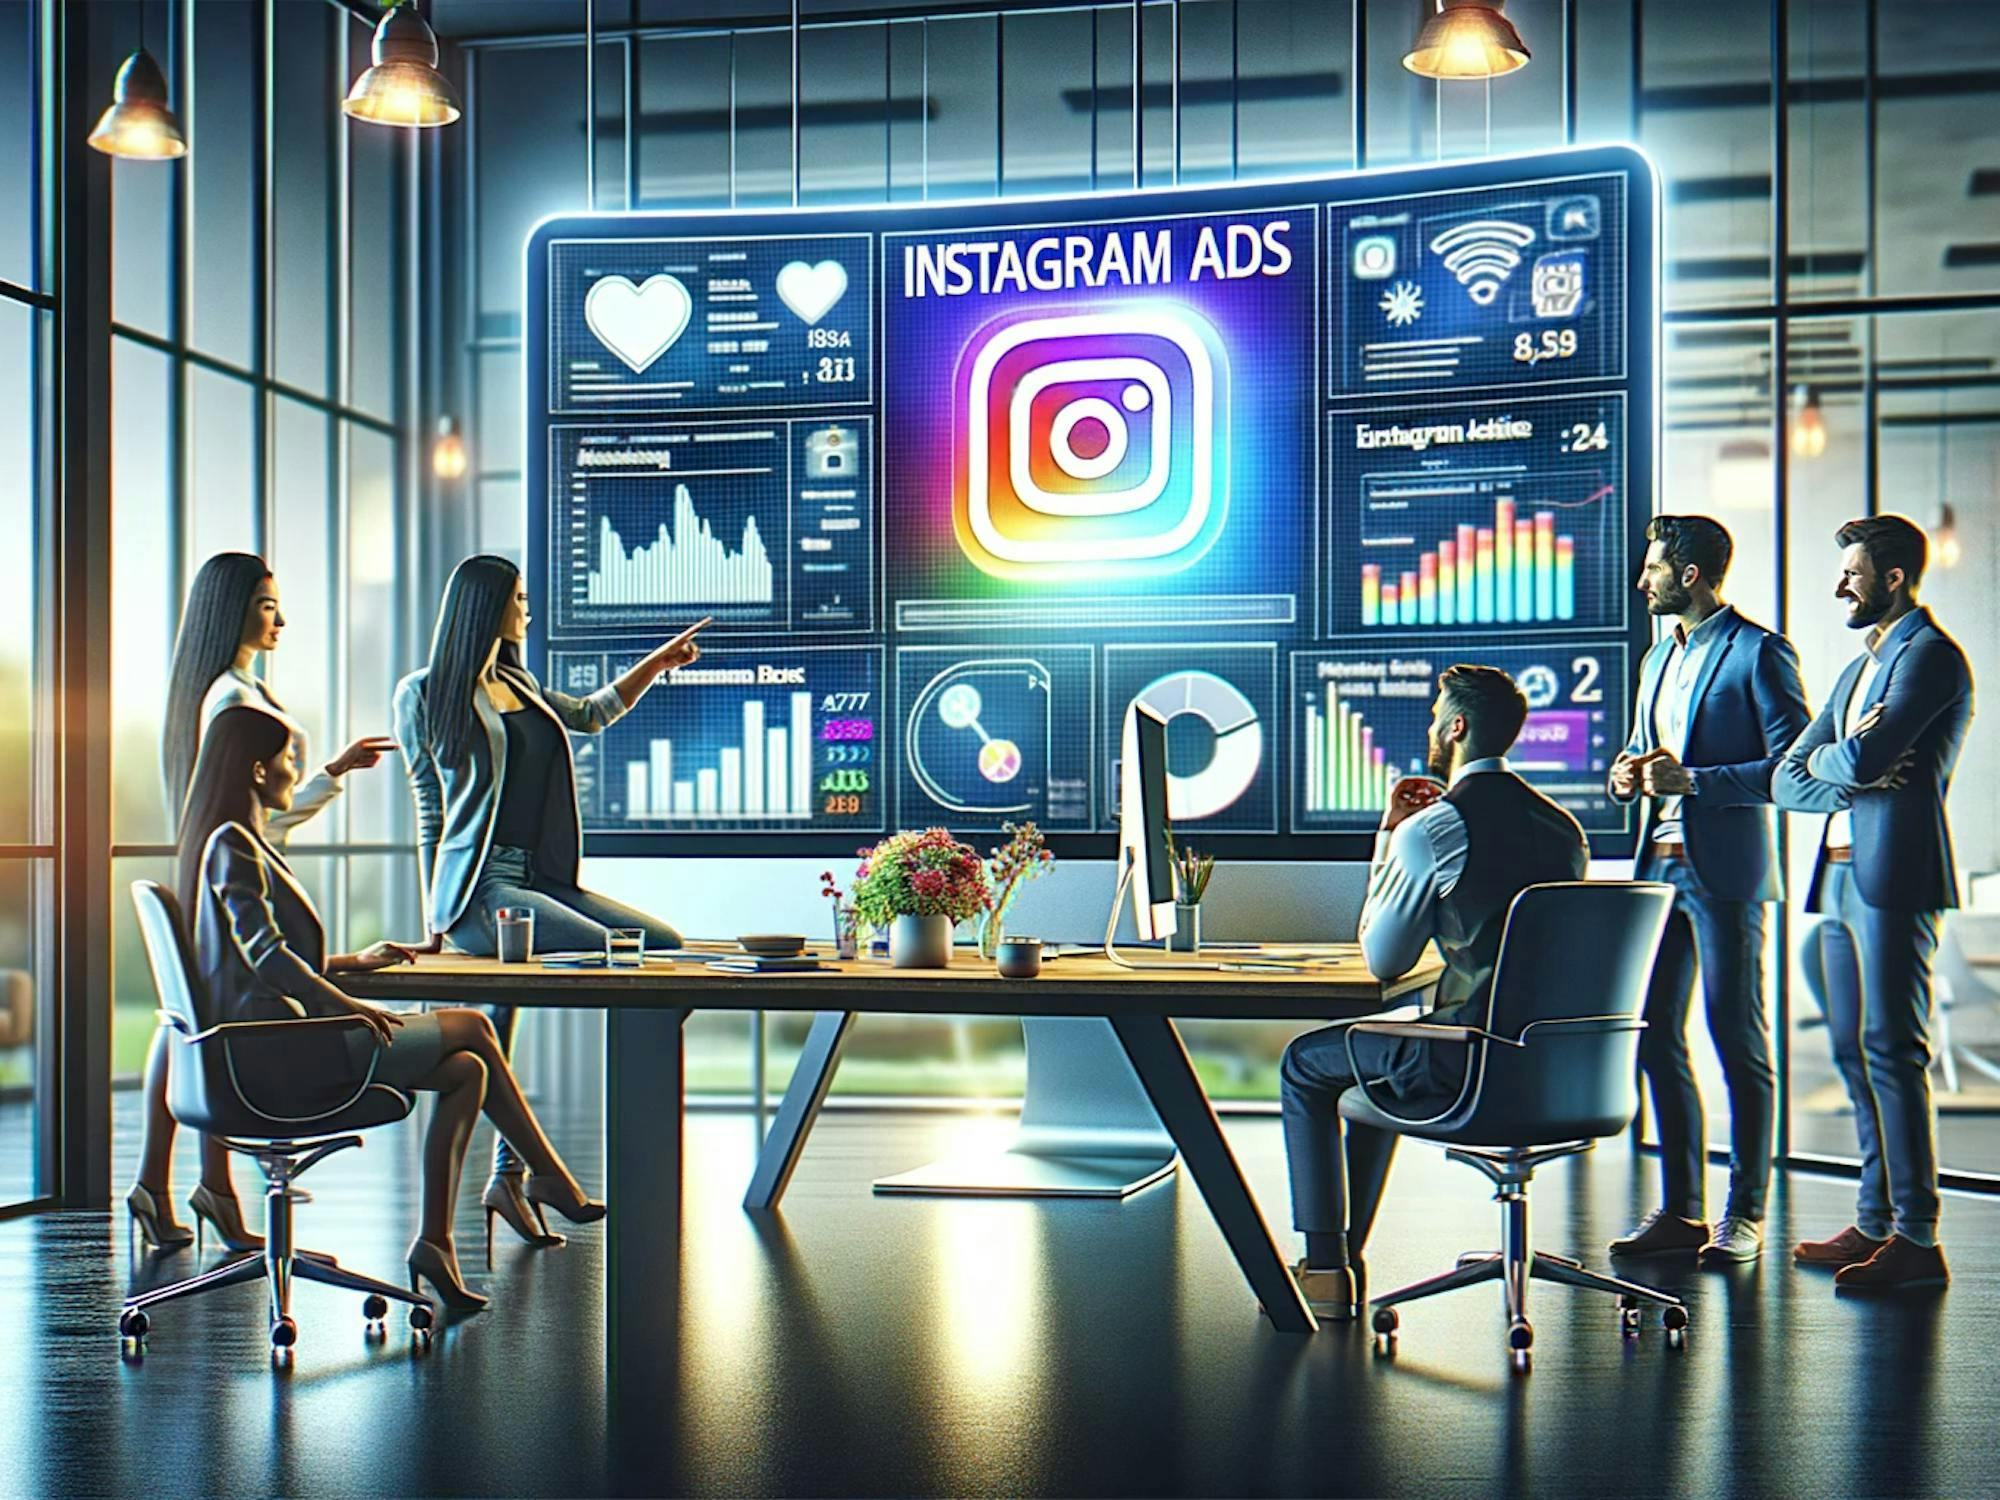 Are instagram ads worth it? Image of an instagram marketing agency looking at a board that says "instagram ads".